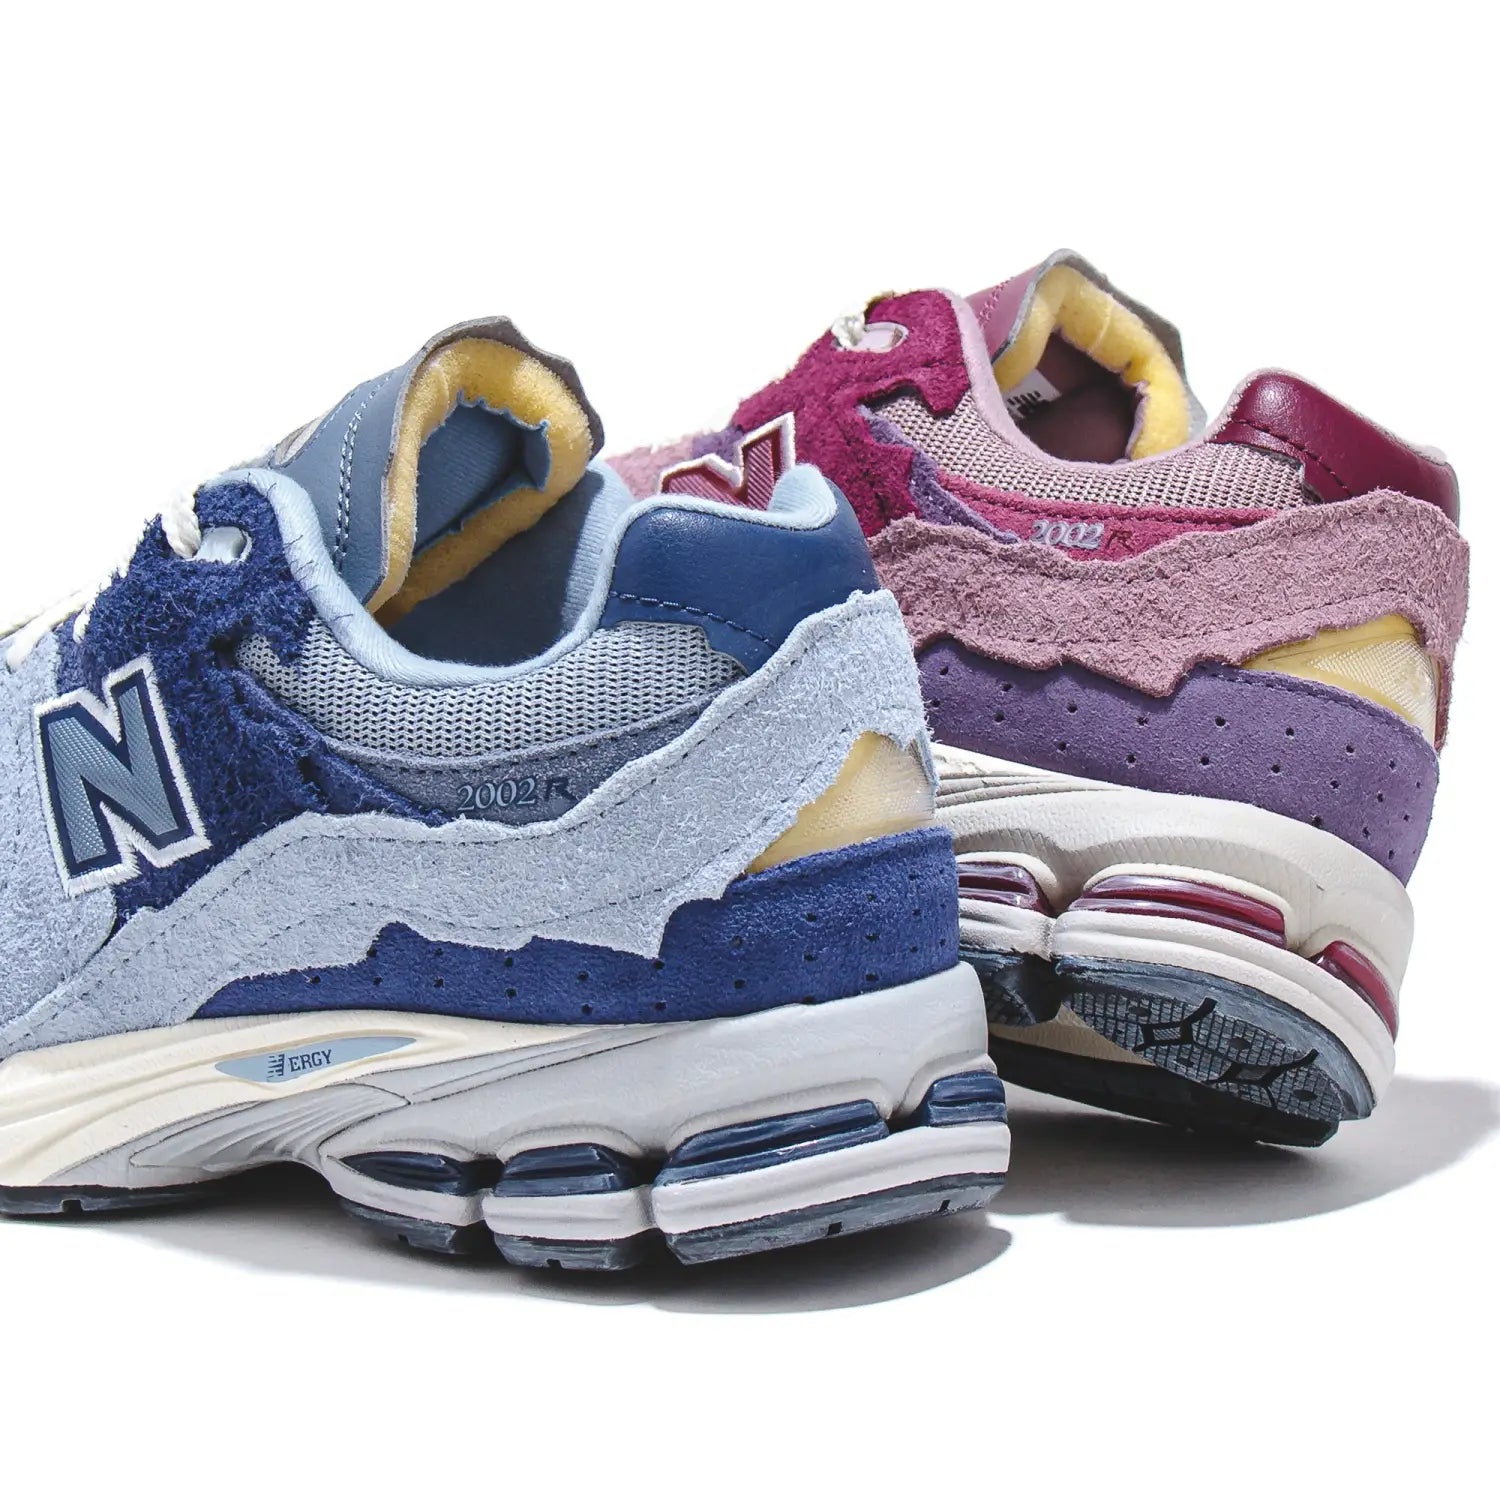 Here Comes Yet Another Colorway for New Balance’ Protection Pack